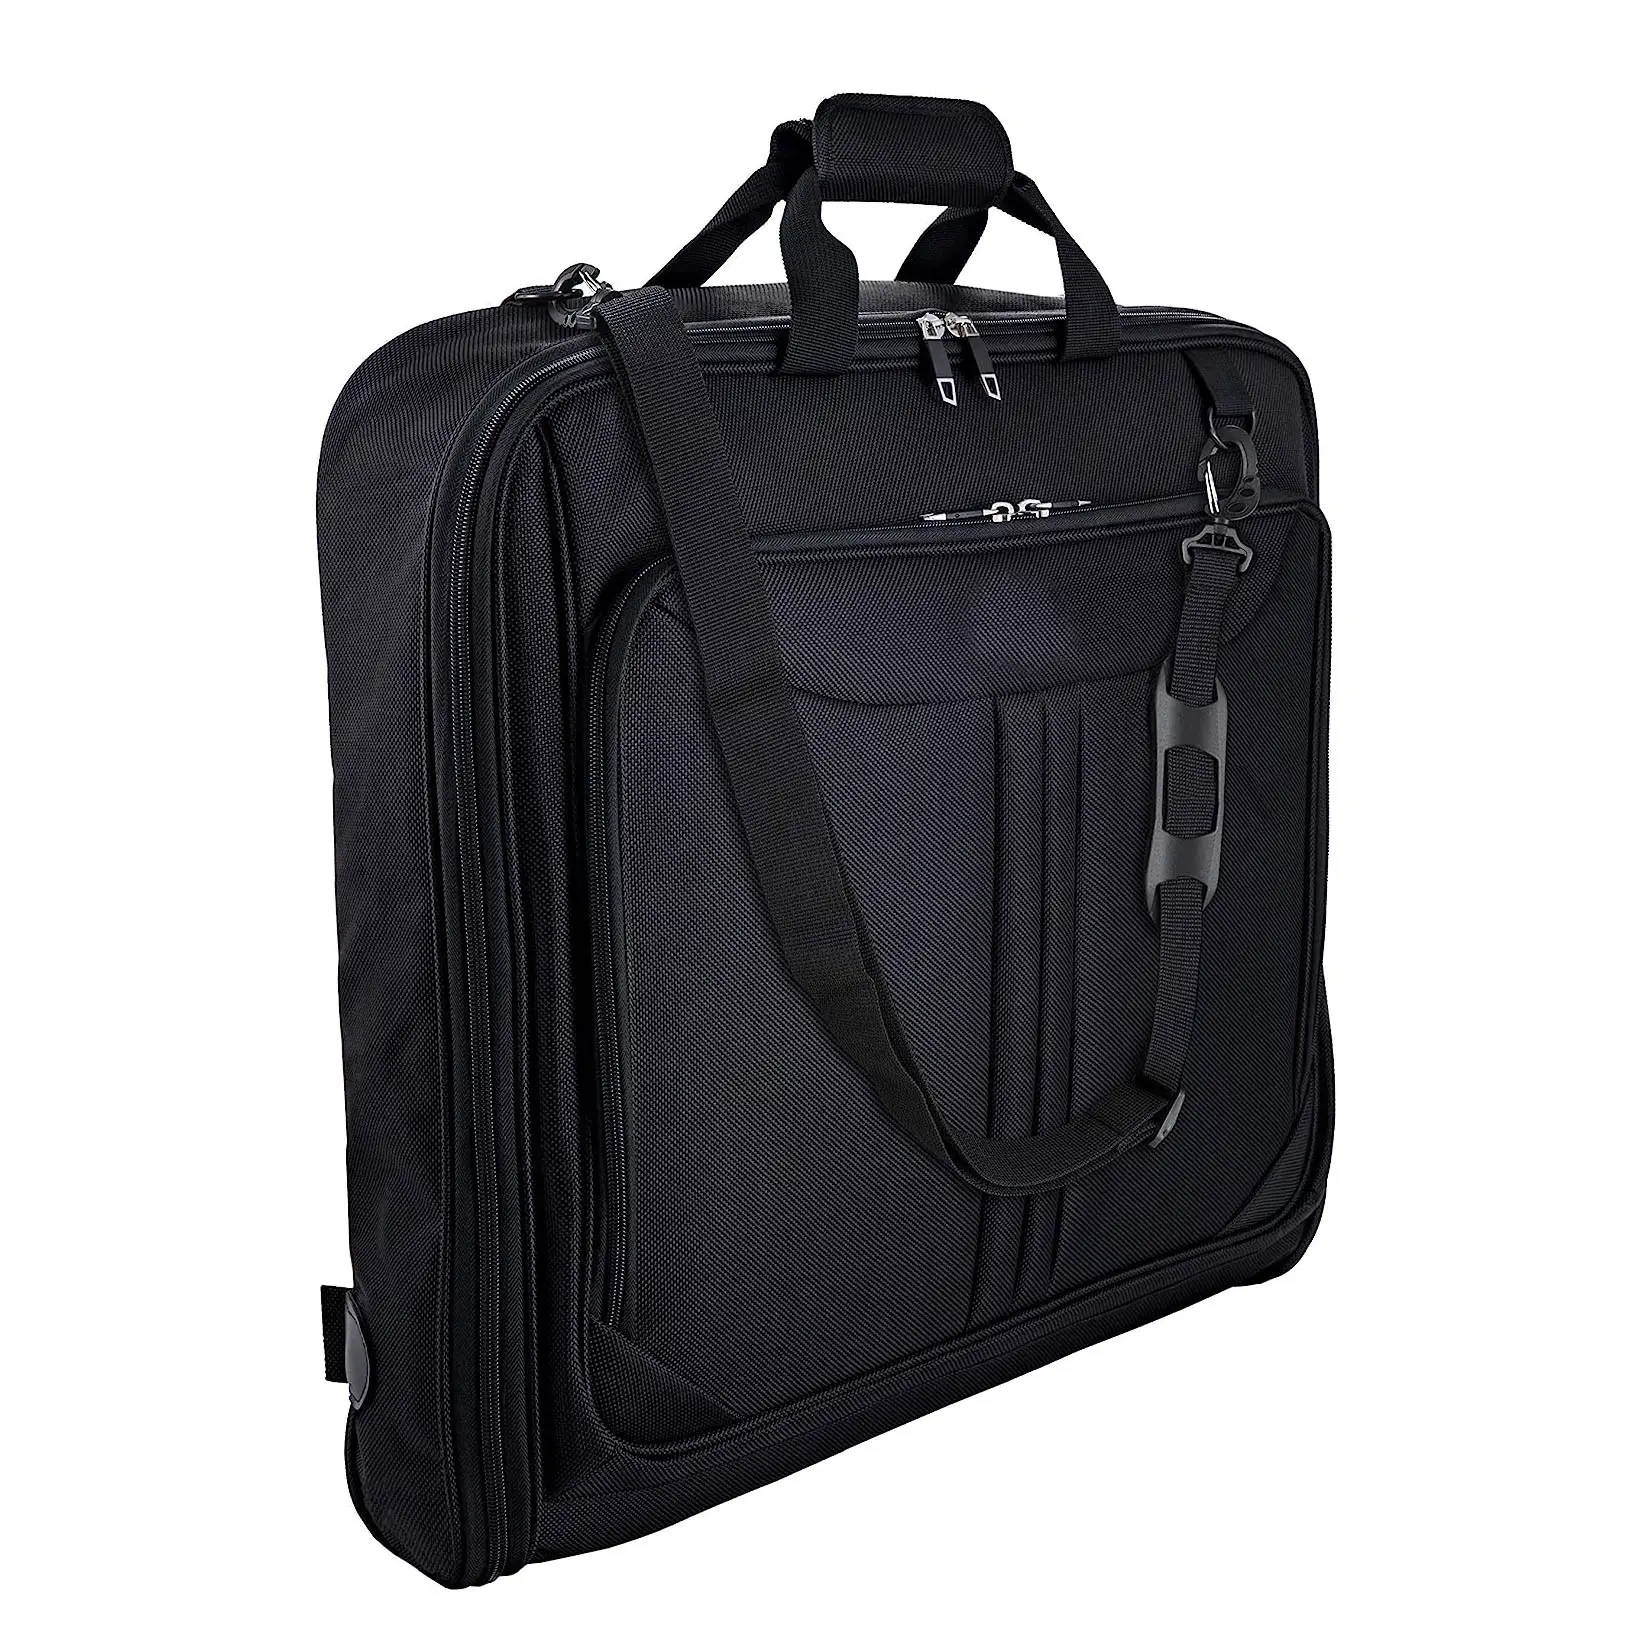 Travel & Business Trips Suit Carry On Garment Bag with Shoulder Strap and Rolling Luggage Attachment Point